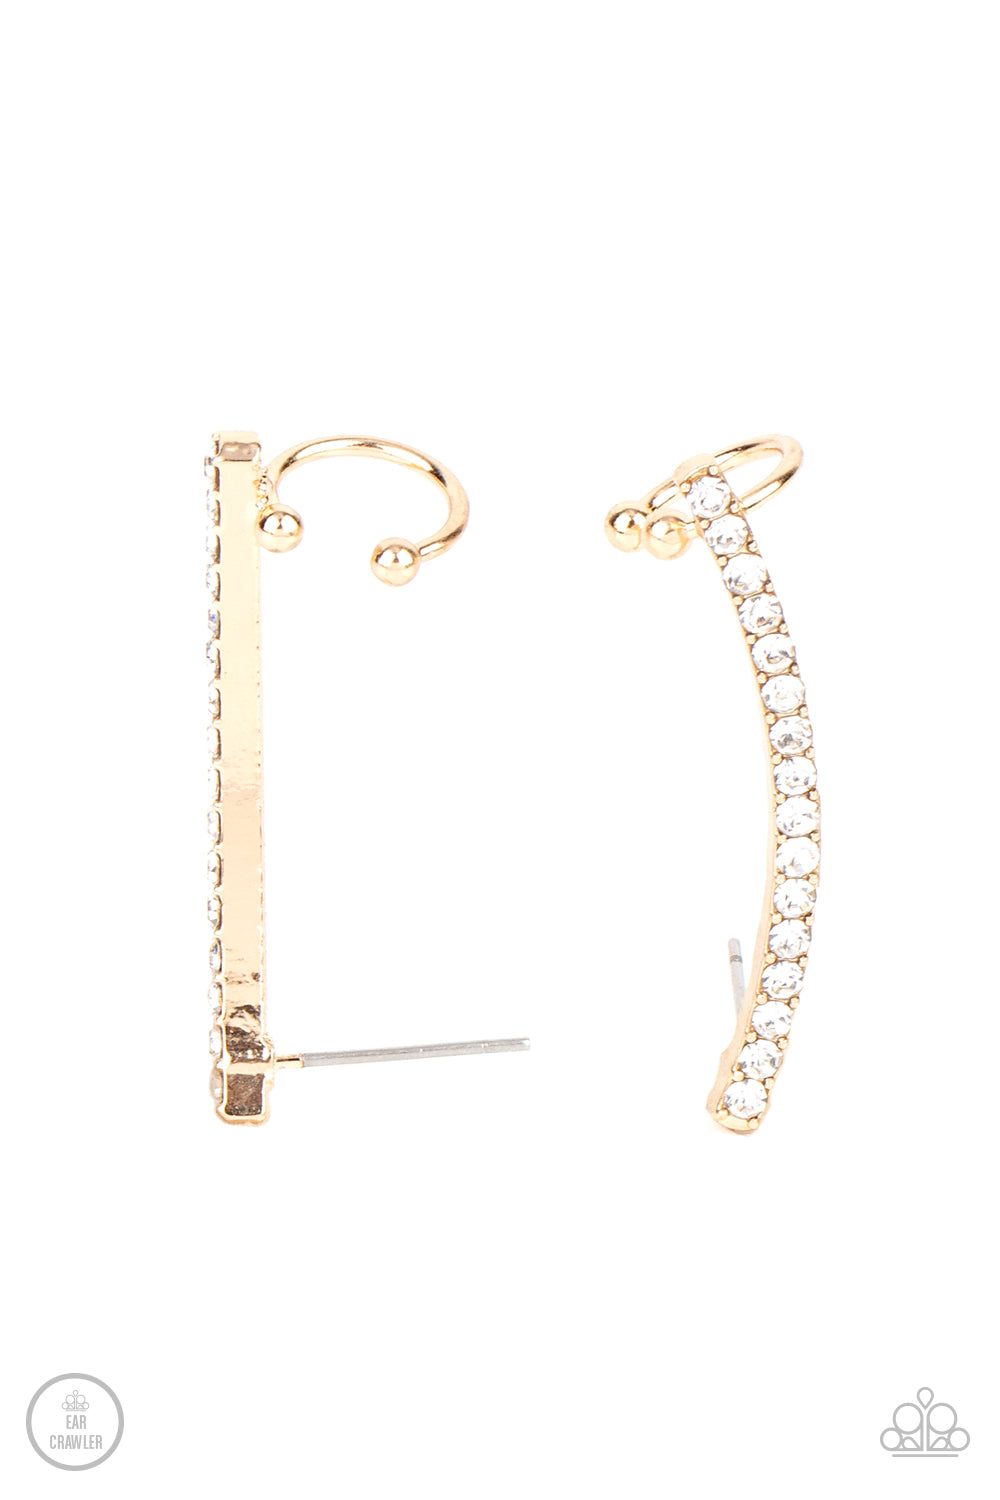 Give Me The SWOOP - Gold ear crawler earring 858